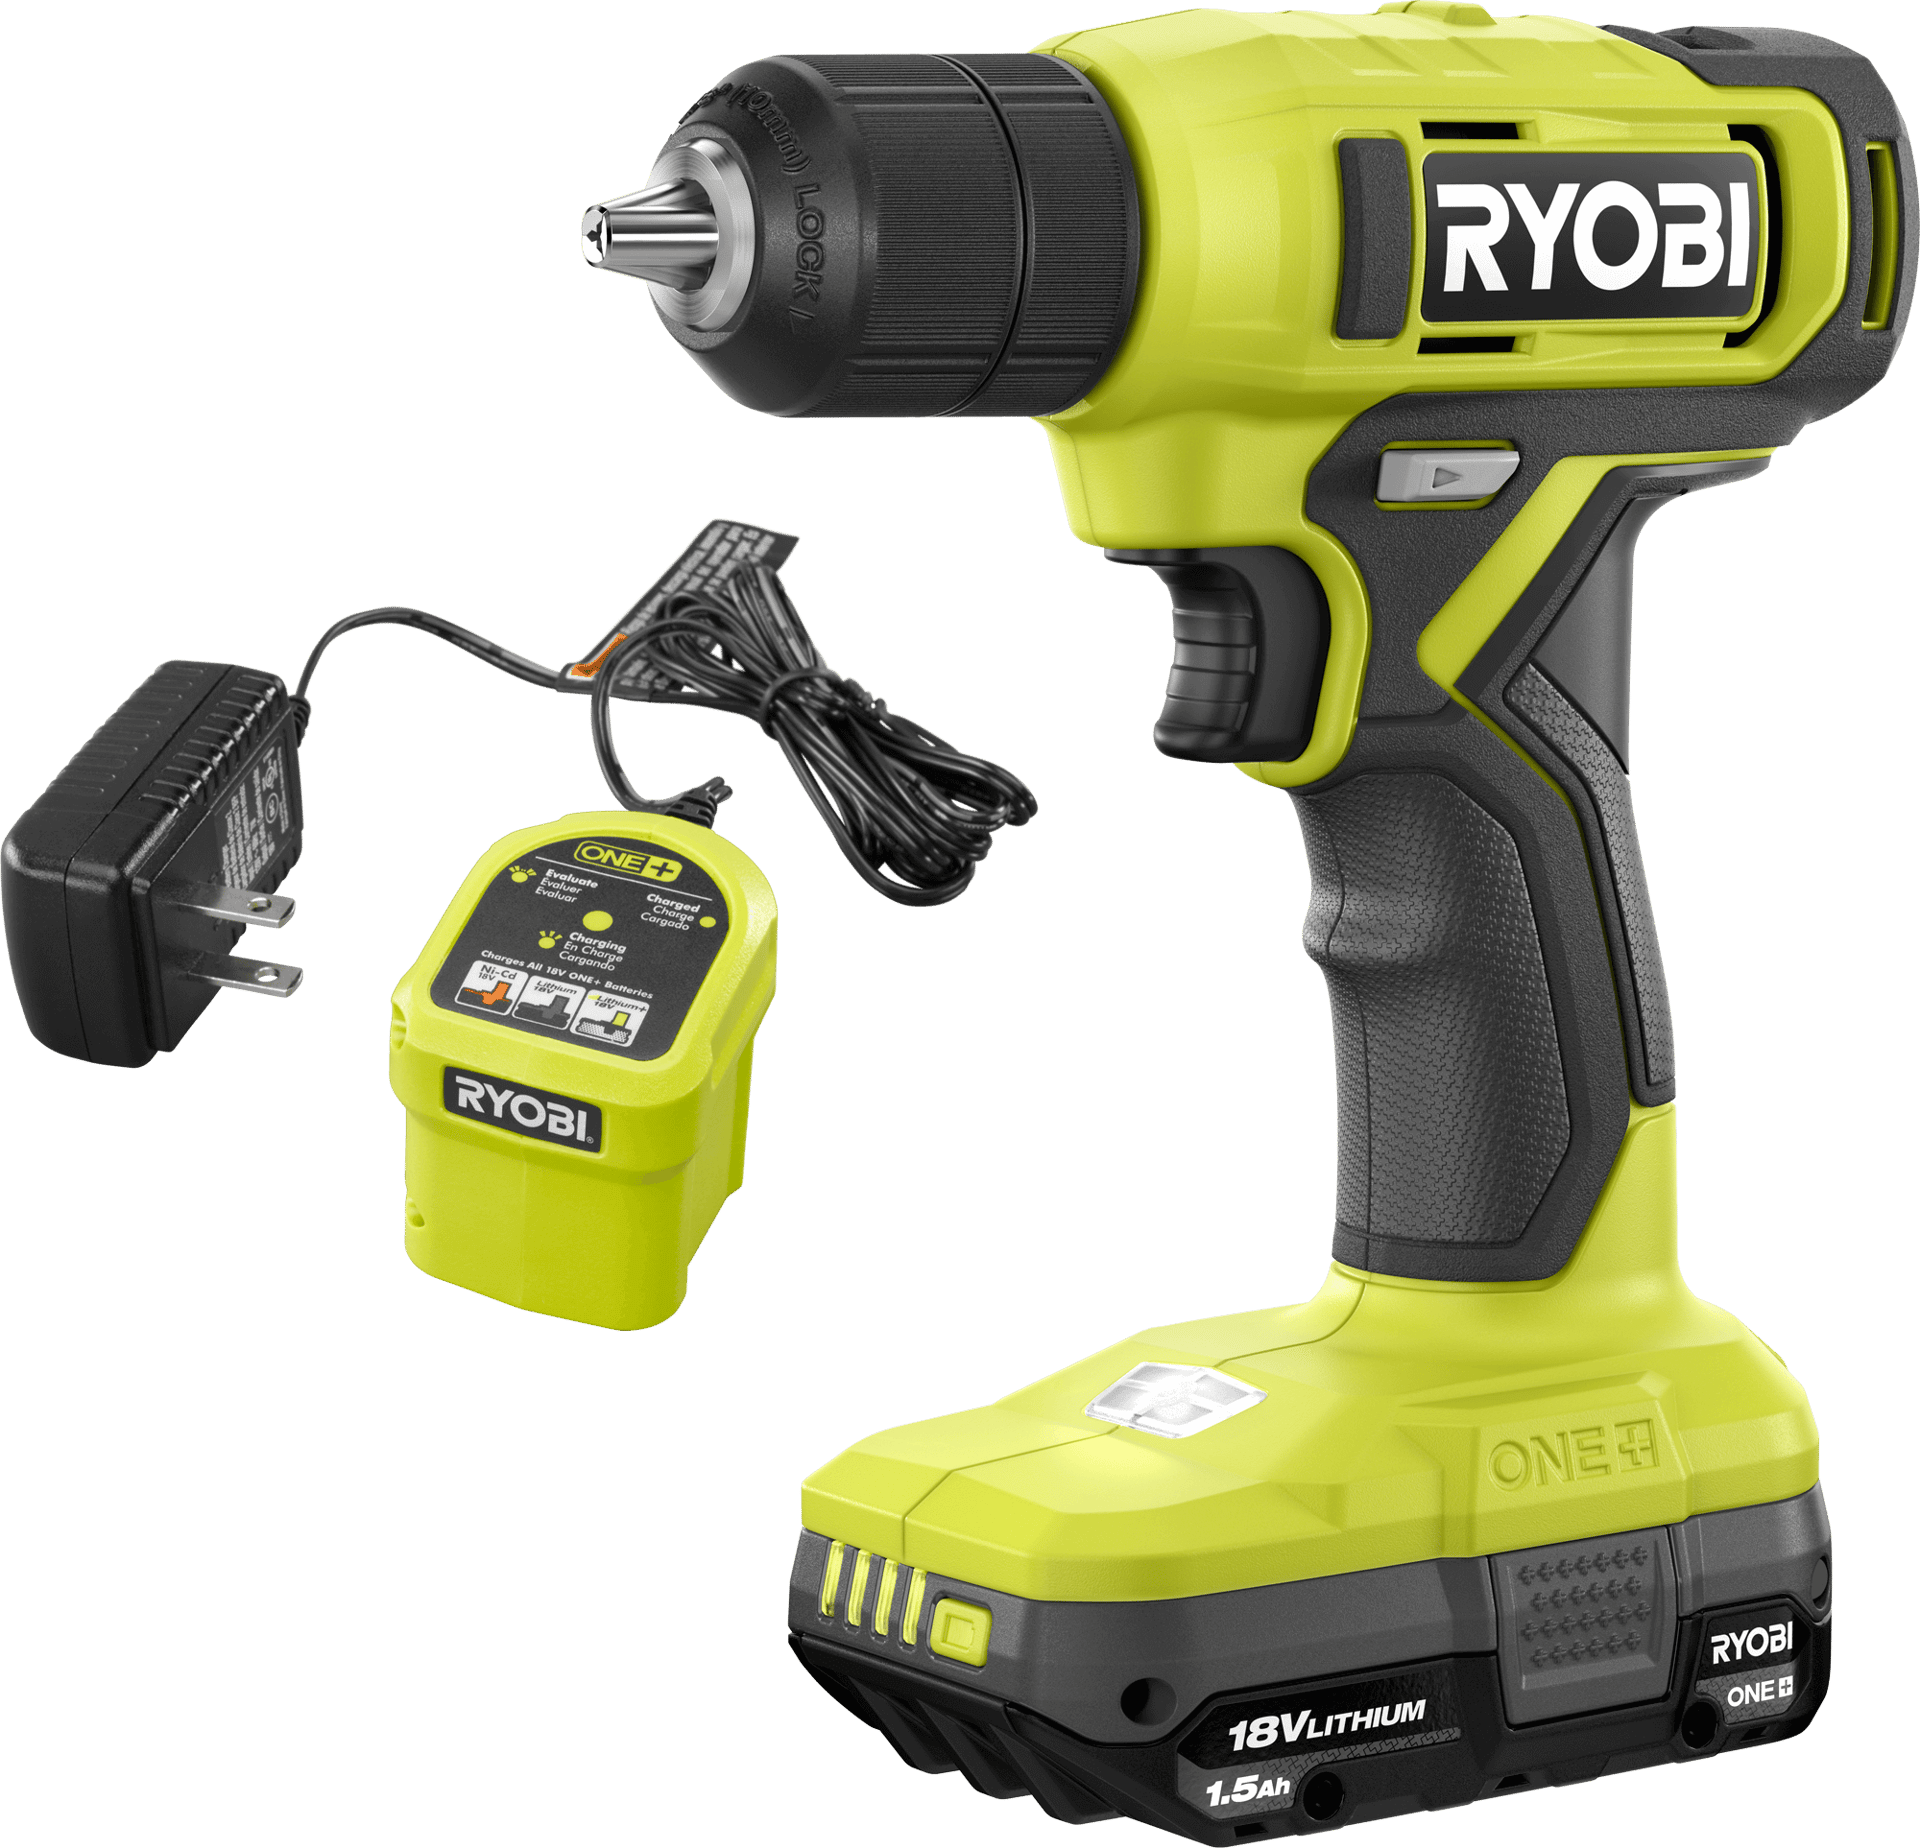 Handheld power drill, Pneumatic tool, Impact wrench, Product, Green, Yellow